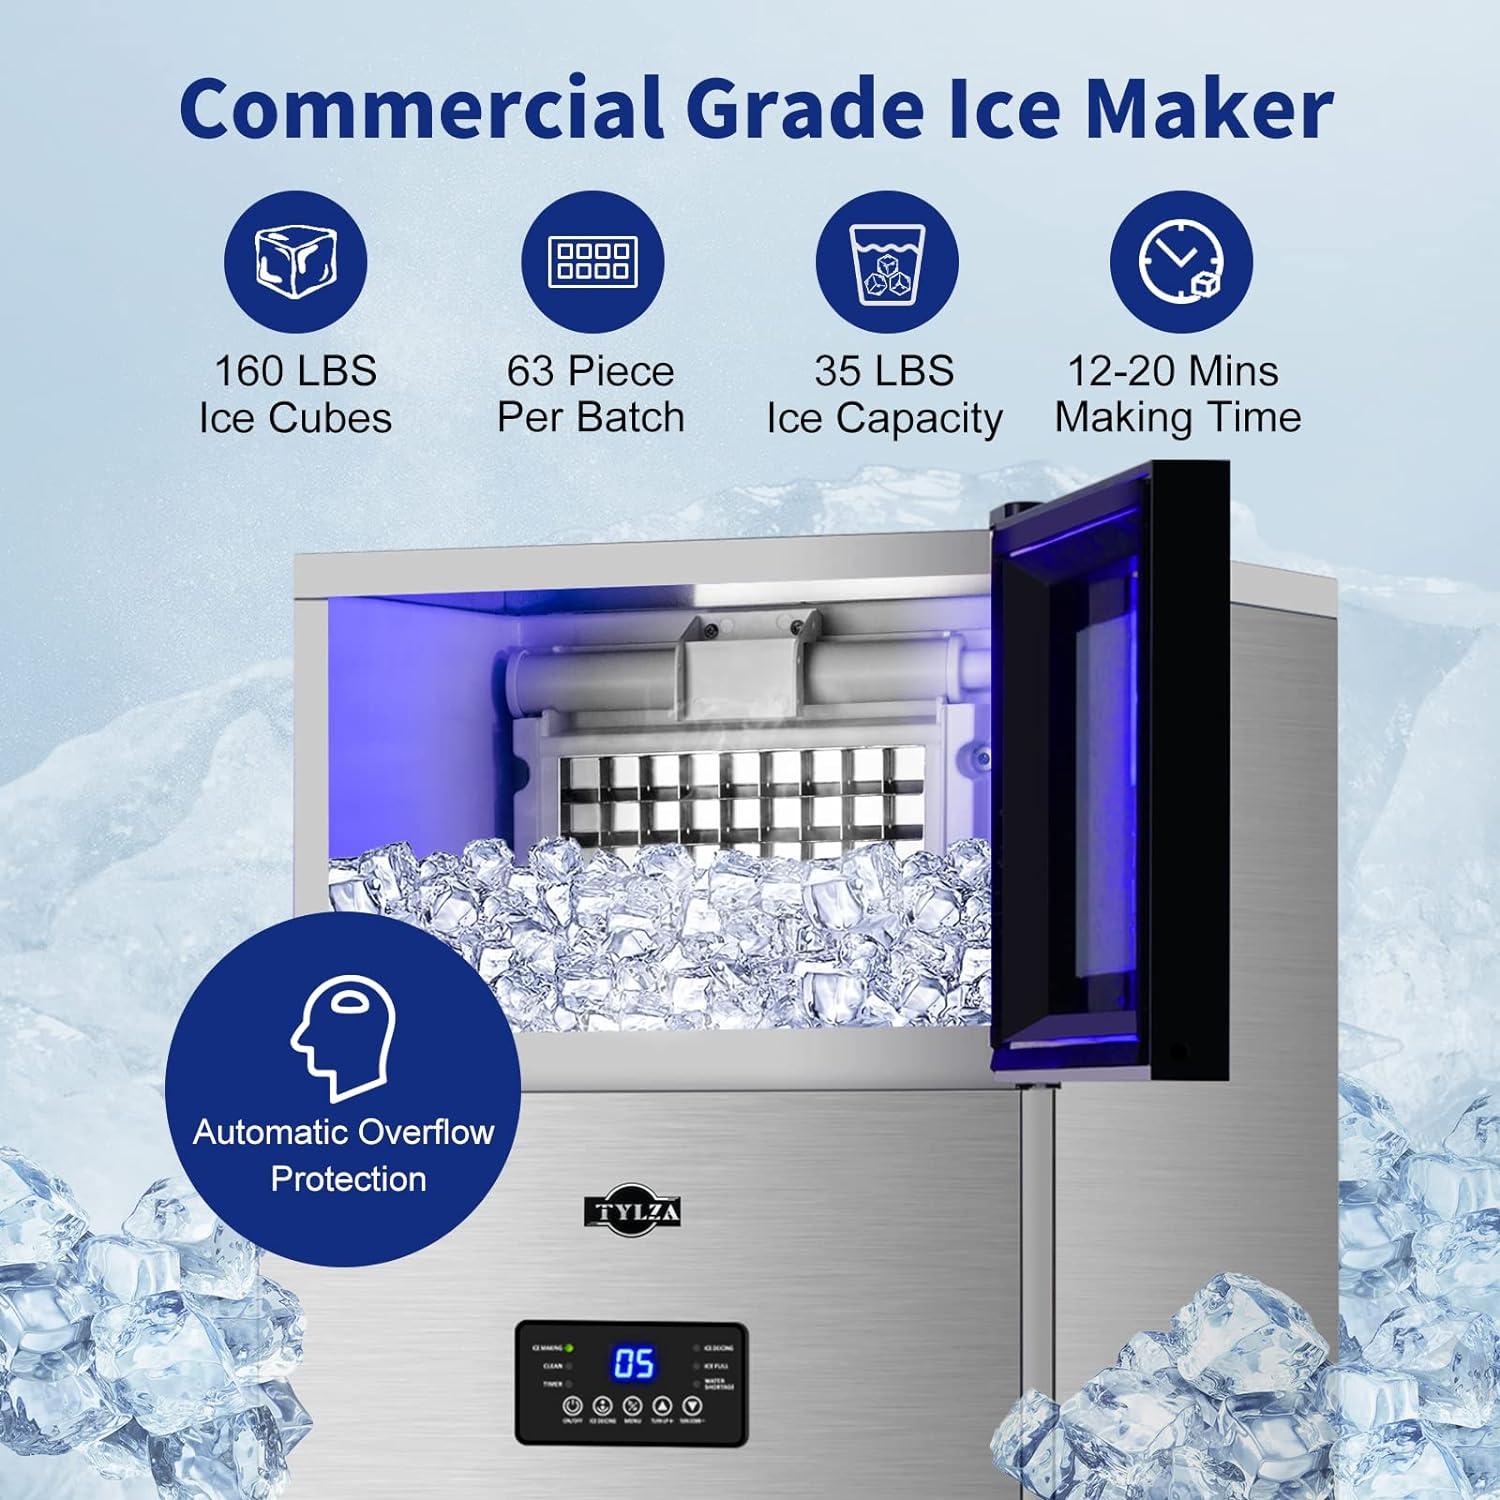 TYLZA Ice Maker Review